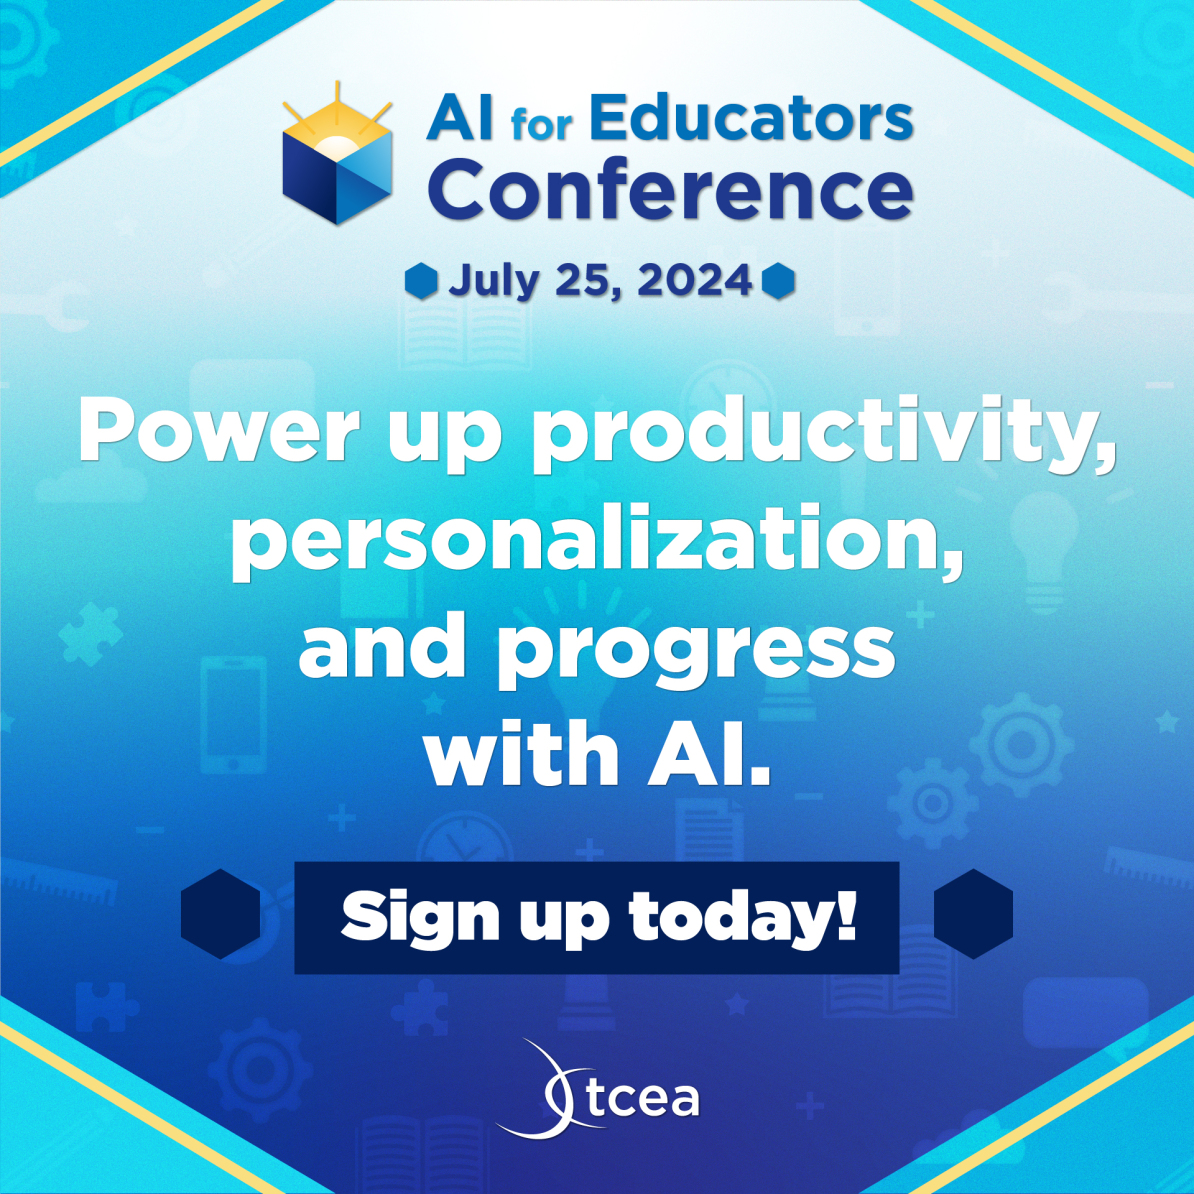 AI in education is revolutionizing the way schools utilize tech to enhance #learning experiences. Learn how to leverage #artificialintelligence to individualize instruction & improve student outcomes at the AI for Educators Conference.

sbee.link/wapbm684tv
#aiined #edutwitter